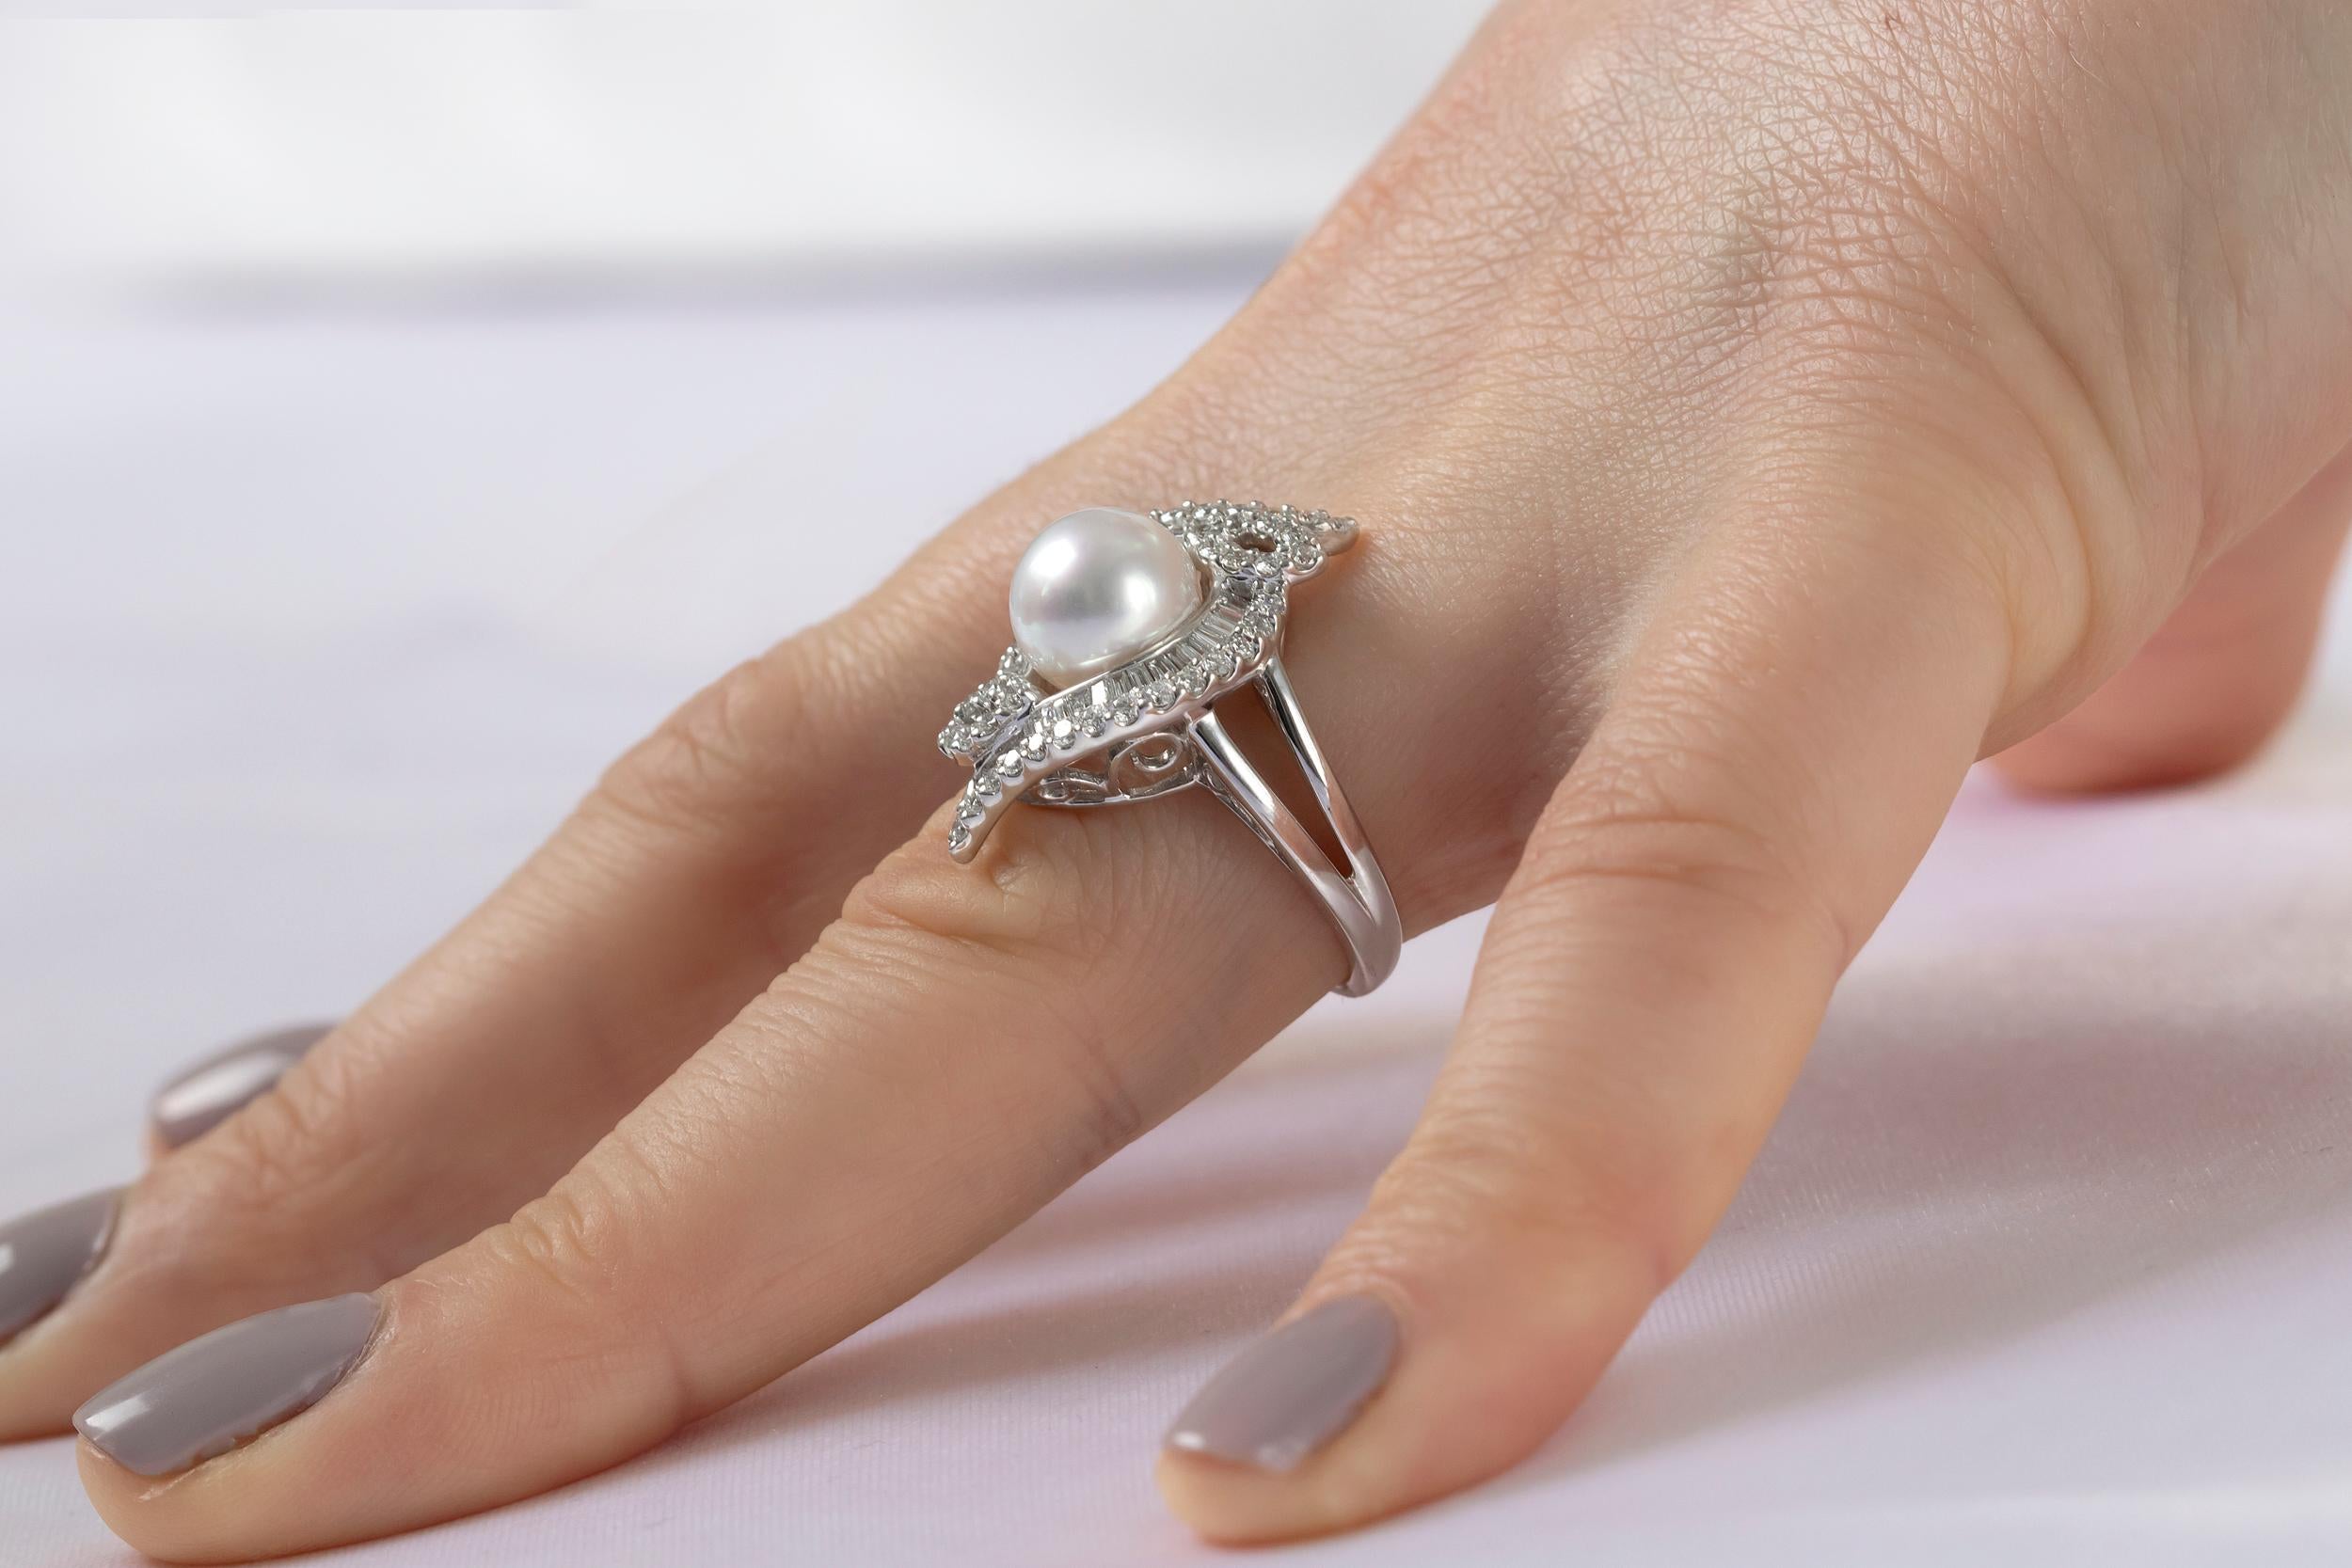 A stunning ring by Yoko London featuring a lustrous South Sea Pearl at the centre surrounded by a bold pattern mixed-cut diamonds which enables the light to sparkle in a unique way. Set in luxurious 18K white gold, this enticing ring is sure to set